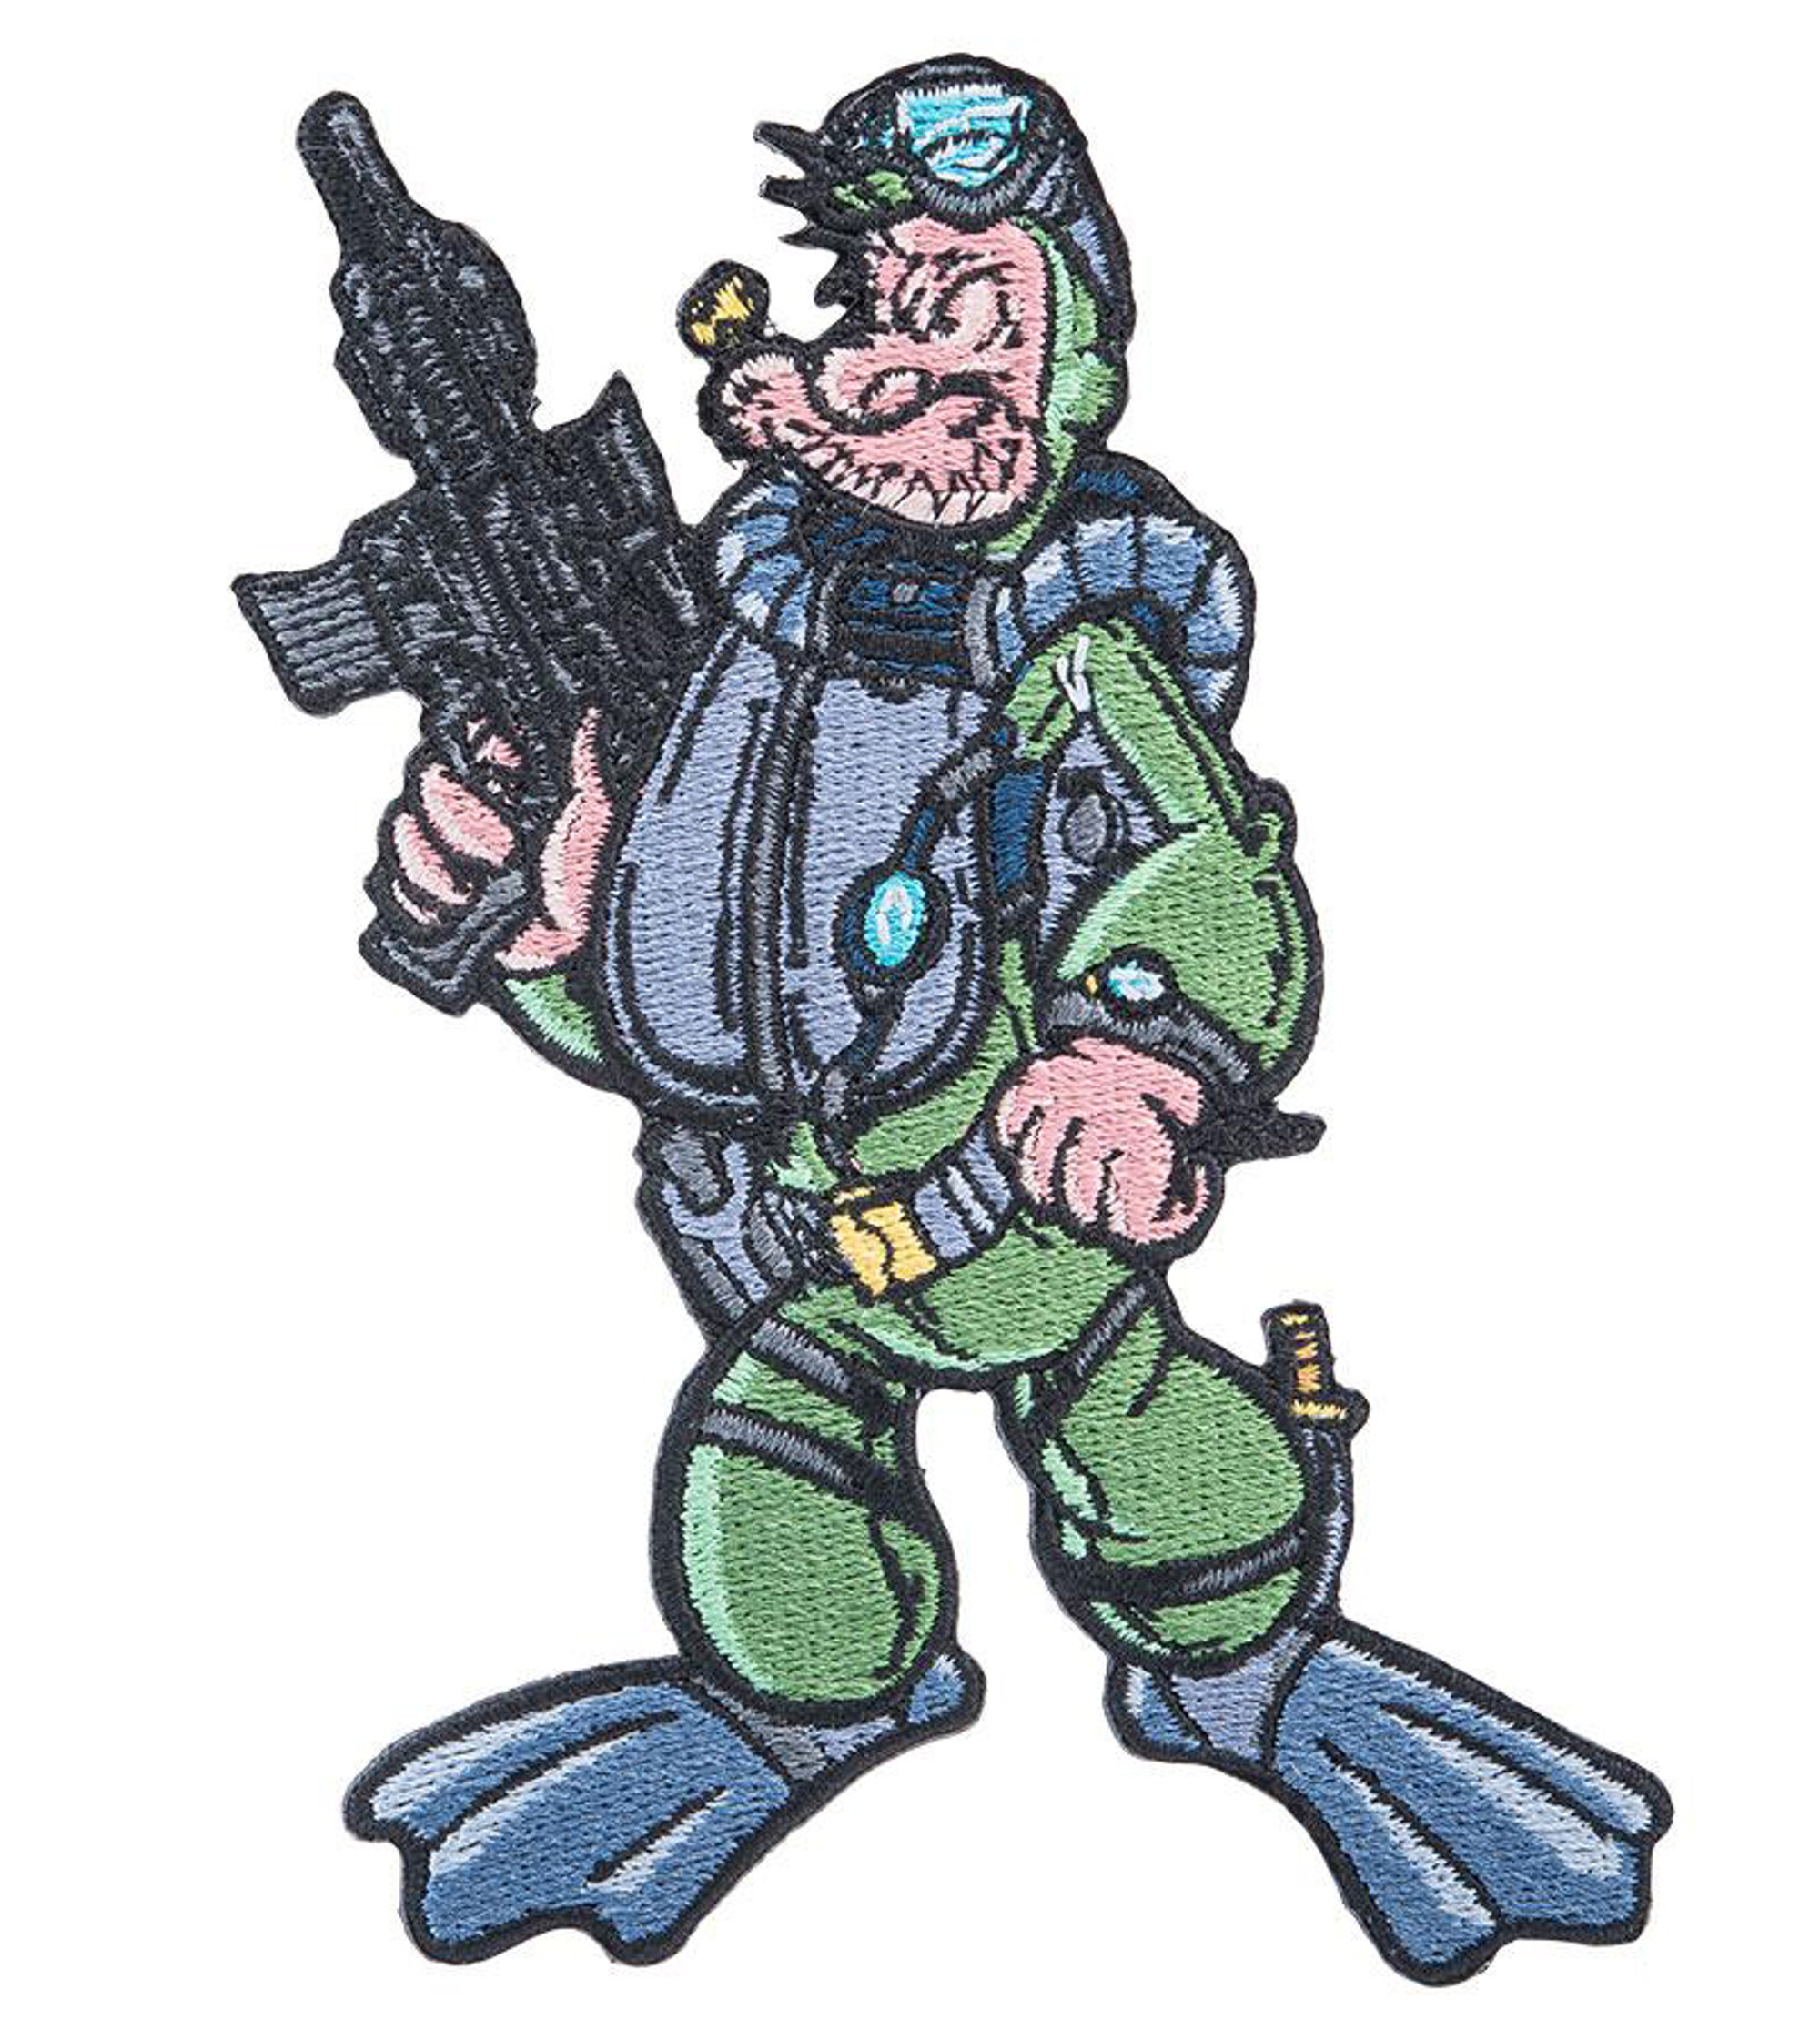 The Activity "The Frogman" Embroidered Morale Patch